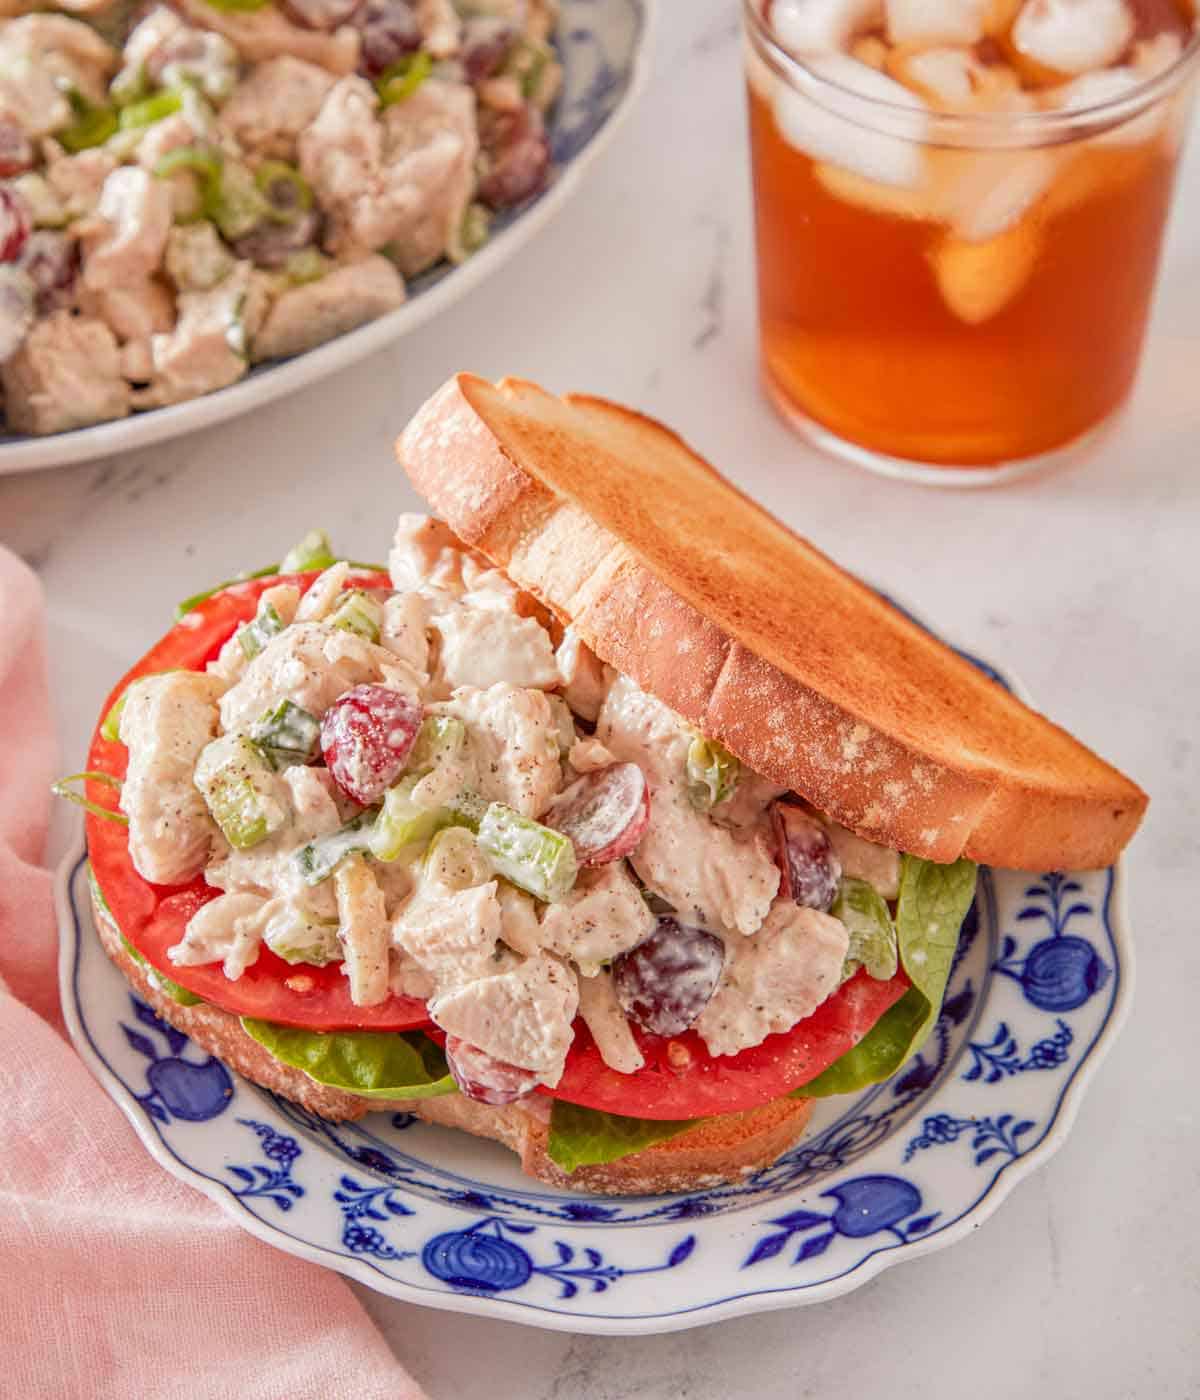 A sandwich filled with chicken salad on a plate with iced tea in the background.